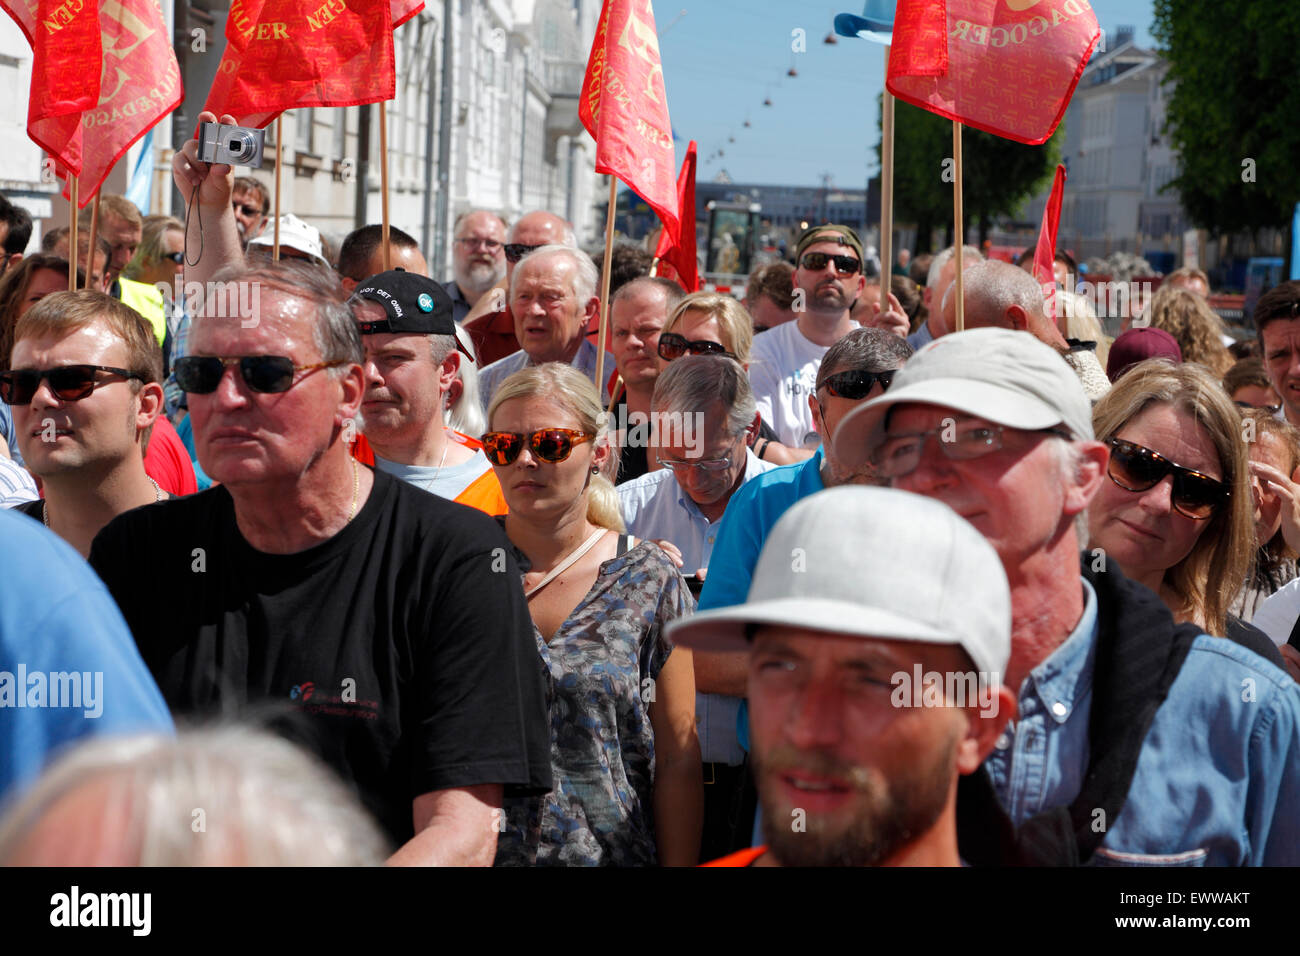 Copenhagen, Denmark. July 1, 2015. The Danish labour market model and the Danish Federation of Trade Unions (LO) won this afternoon in the Danish Labour Court in Copenhagen. Ryanair’s recently established base in Copenhagen is ruled subject to Danish labour laws and industrial actions can be taken by the unions. Crowd outside the Labour Court building on the first hot summer day awaiting the ruling and speeches. Credit:  Niels Quist/Alamy Live News Stock Photo